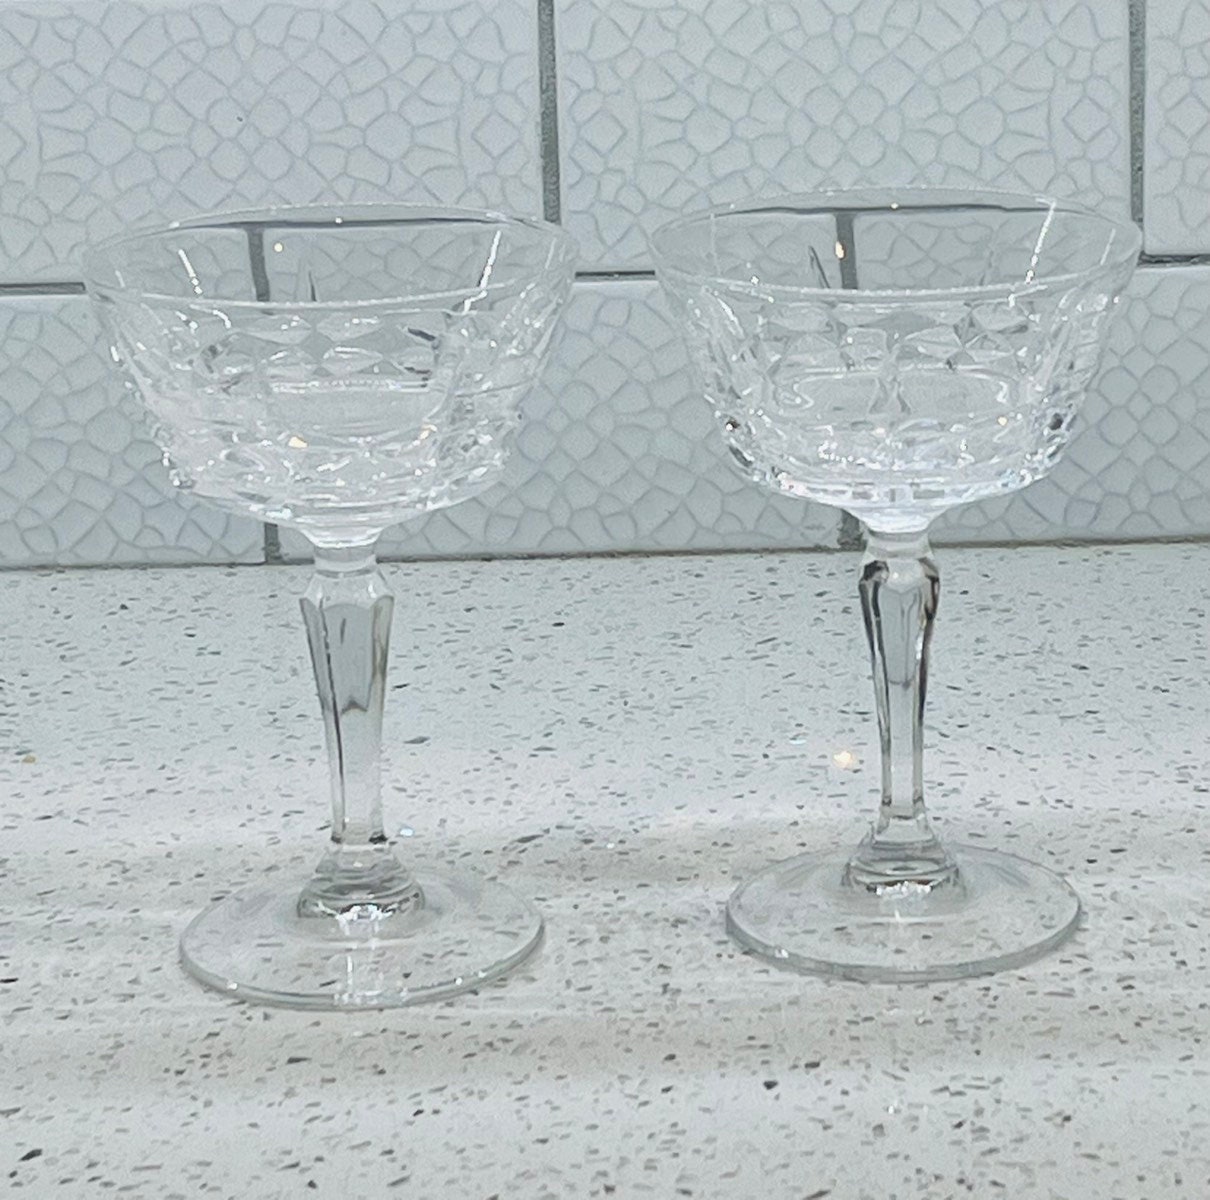 Set Of 4 W.M. DALTON French 5.25 Inches Lead Crystal Glasses Made in France